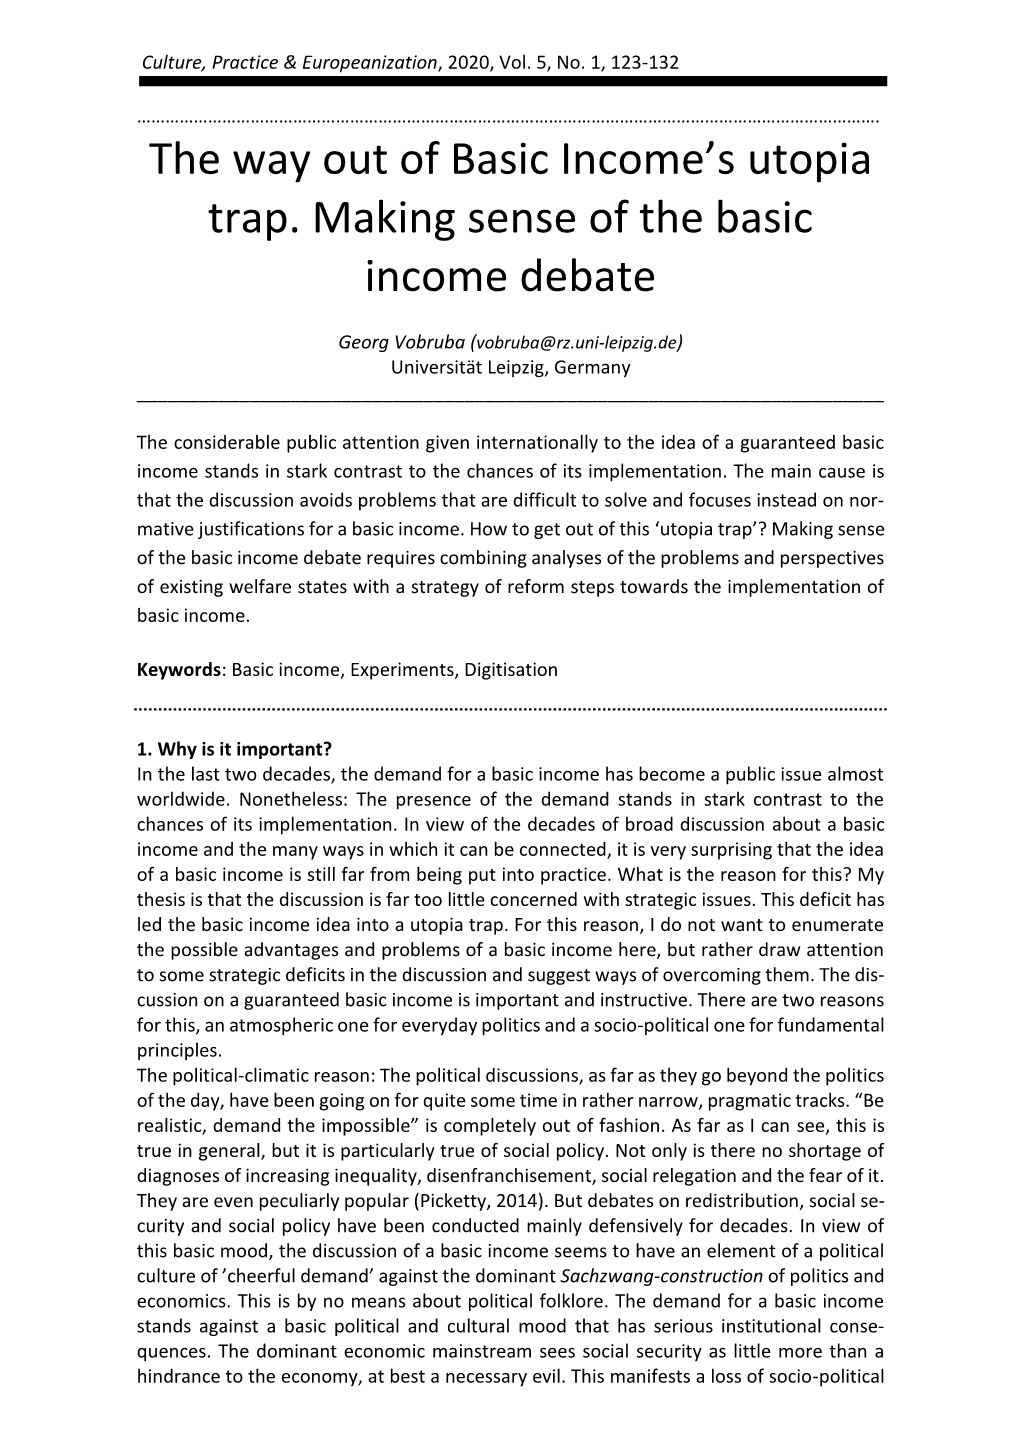 The Way out of Basic Income's Utopia Trap. Making Sense of the Basic